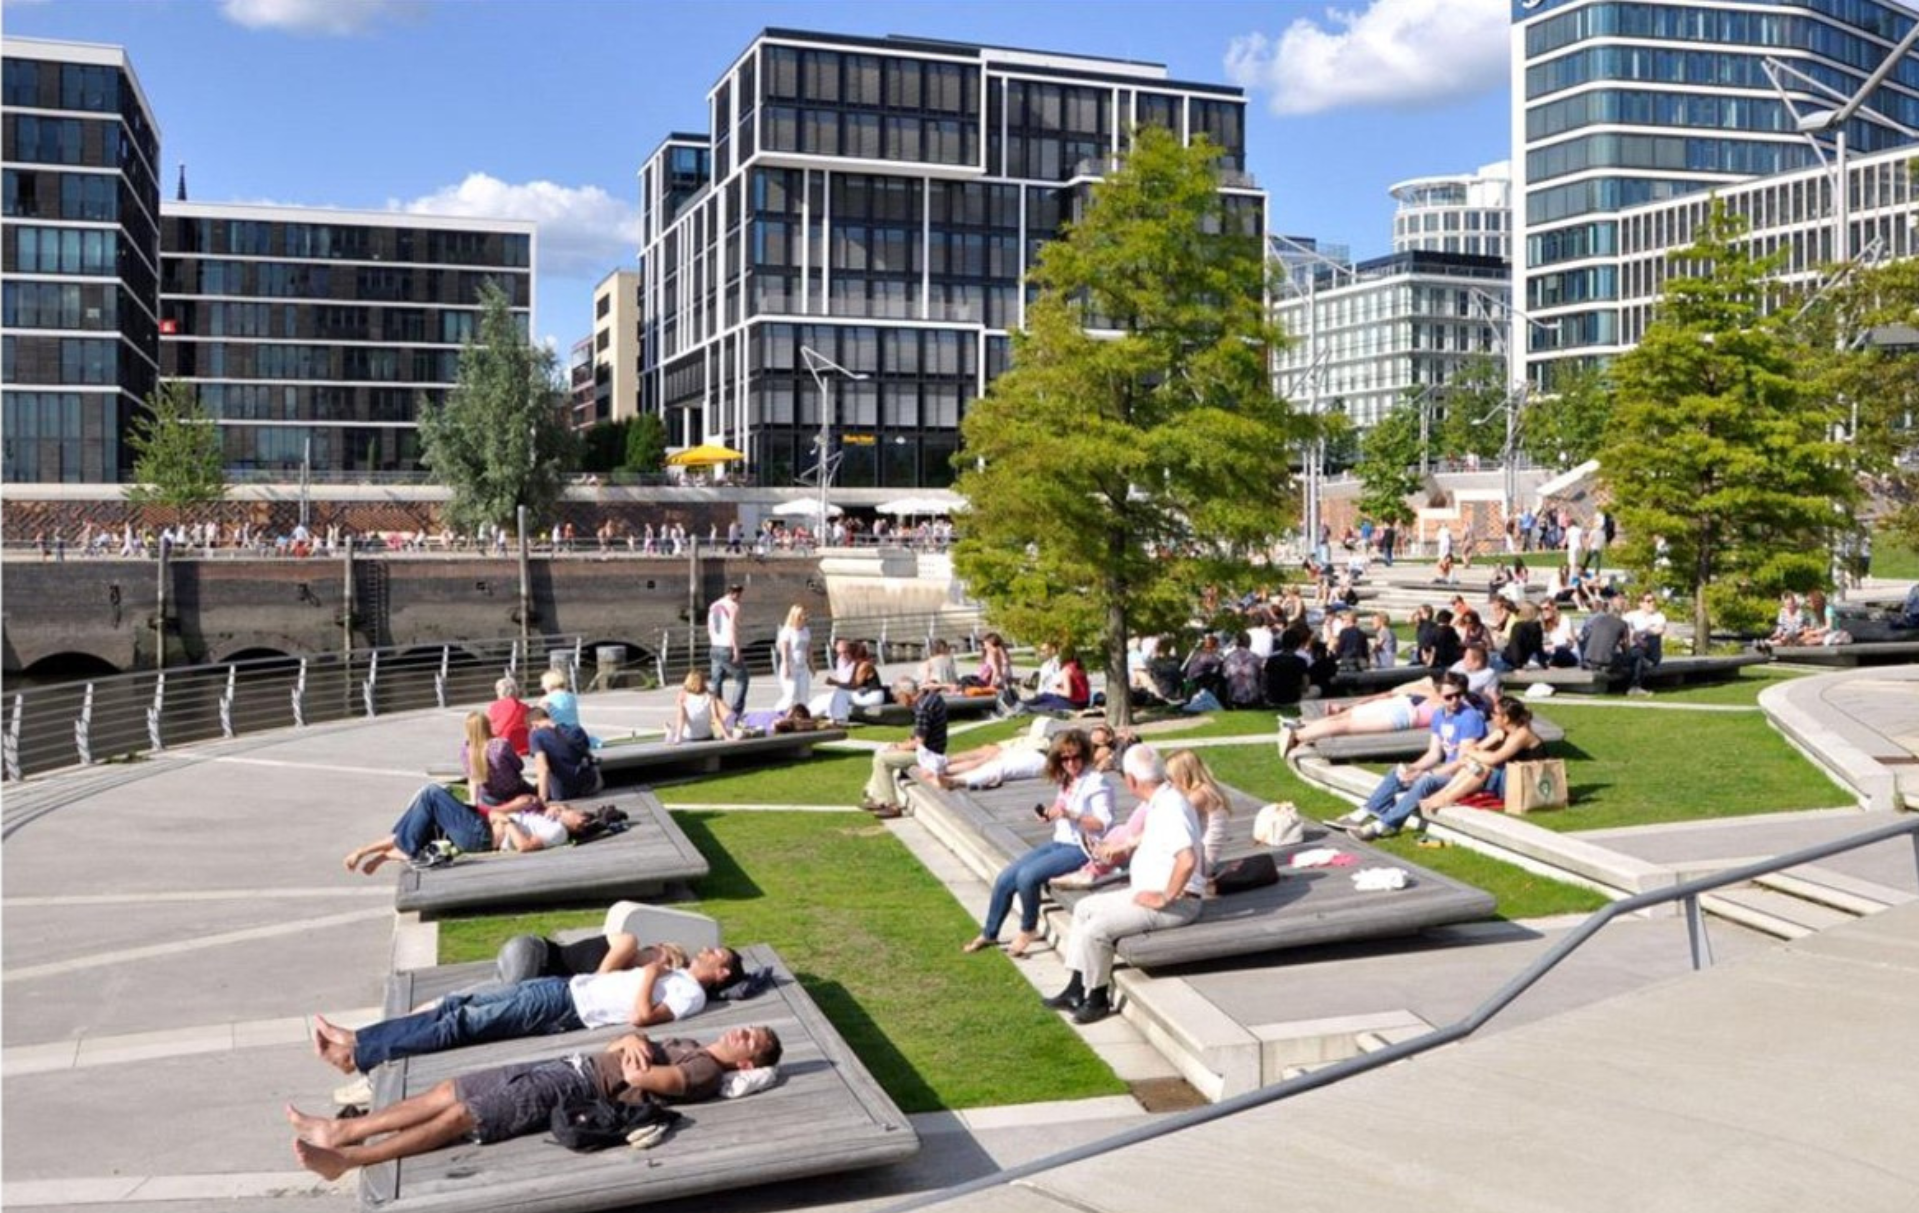 3. Hamburg, HafenCity, the equipped spaces